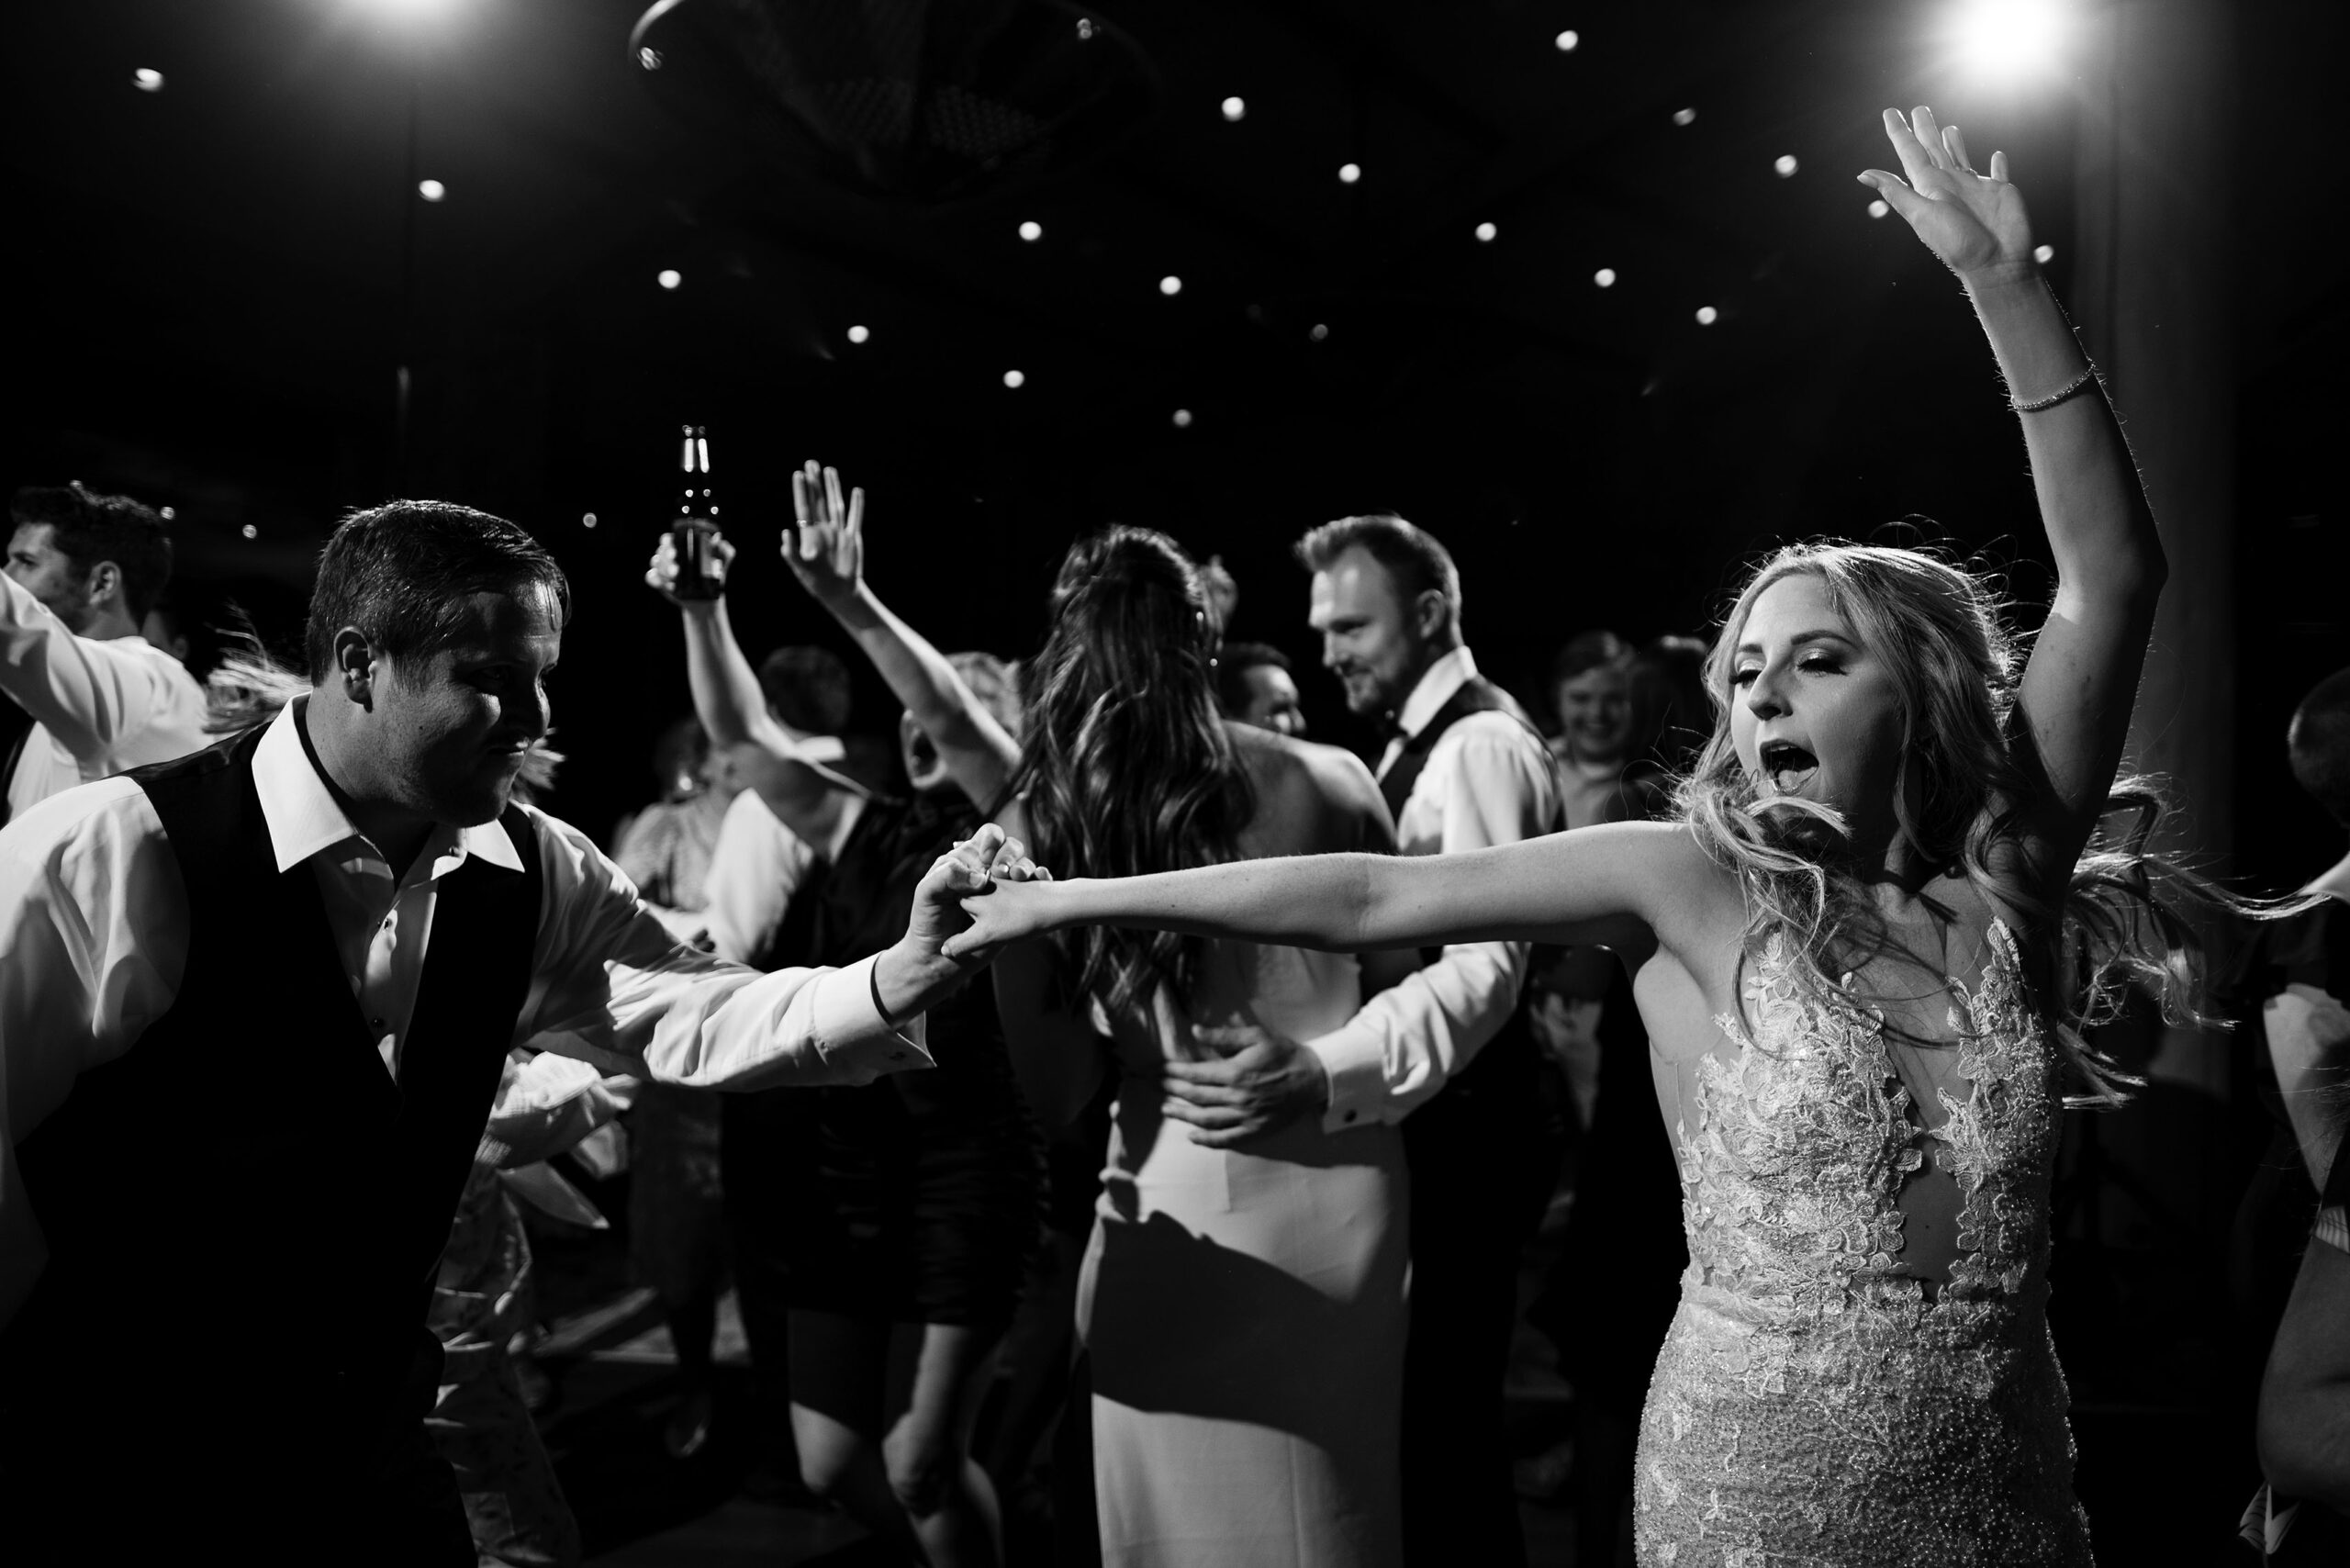 The bride dances with her brother